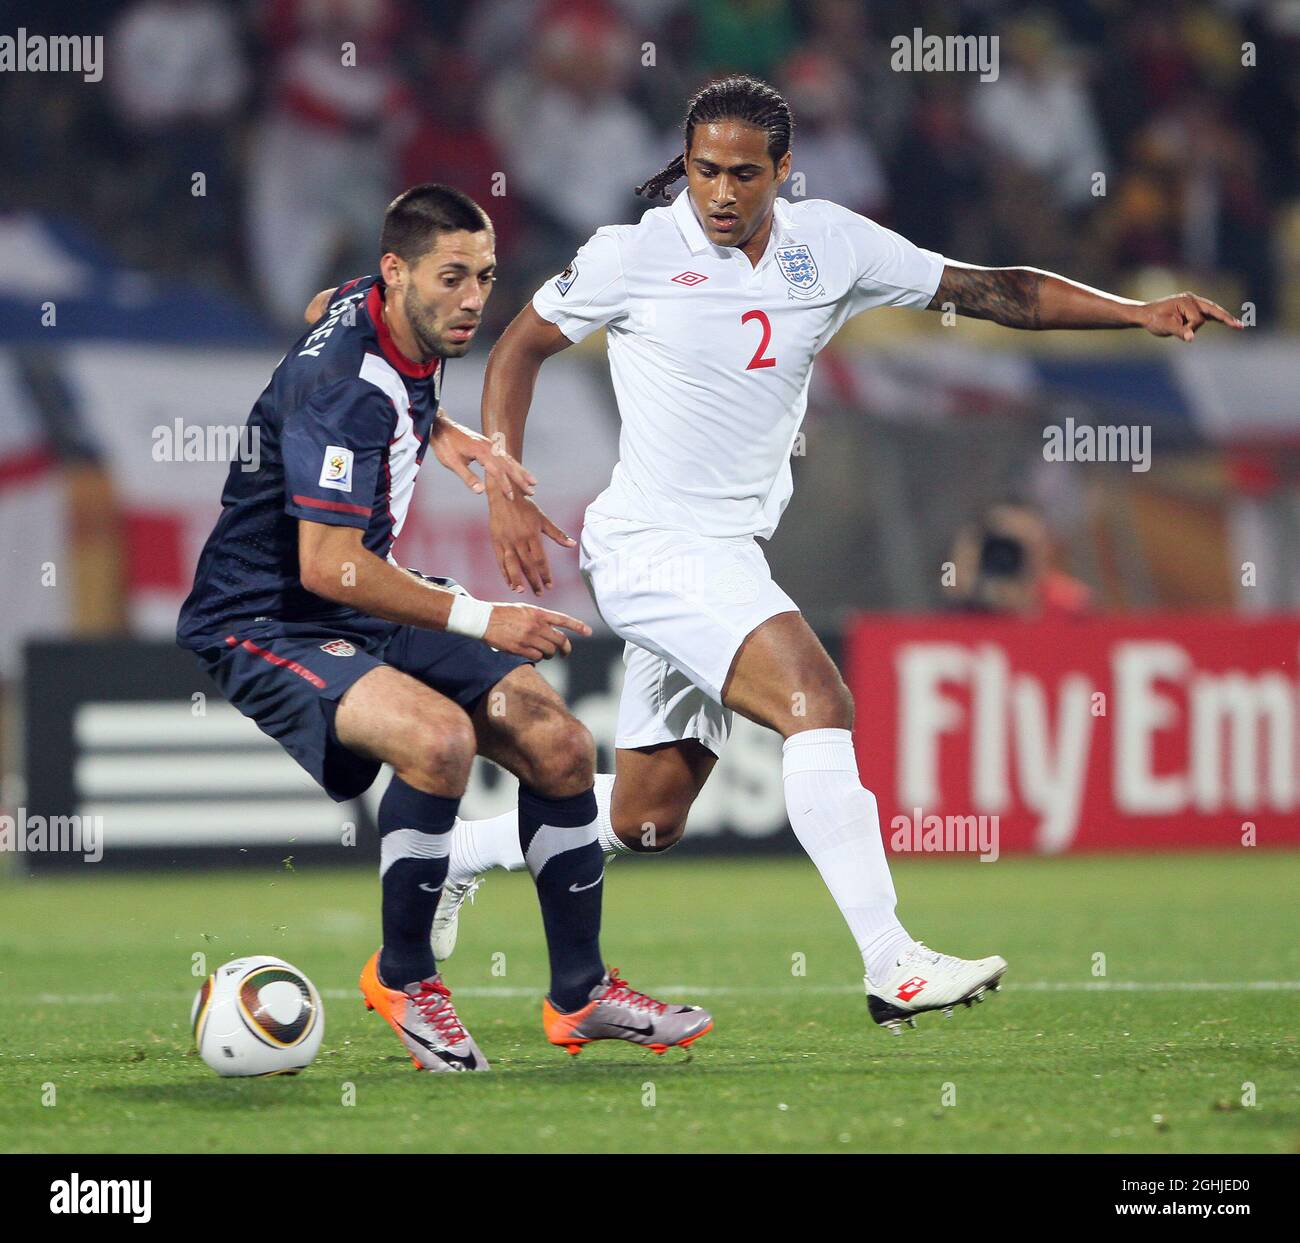 England's Glen Johnson tussles with USA's Clint Dempsey during the FIFA World Cup 2010, Group C match between England and USA at Royal Bafokeng Stadium, Rustenburg, South Africa. Stock Photo